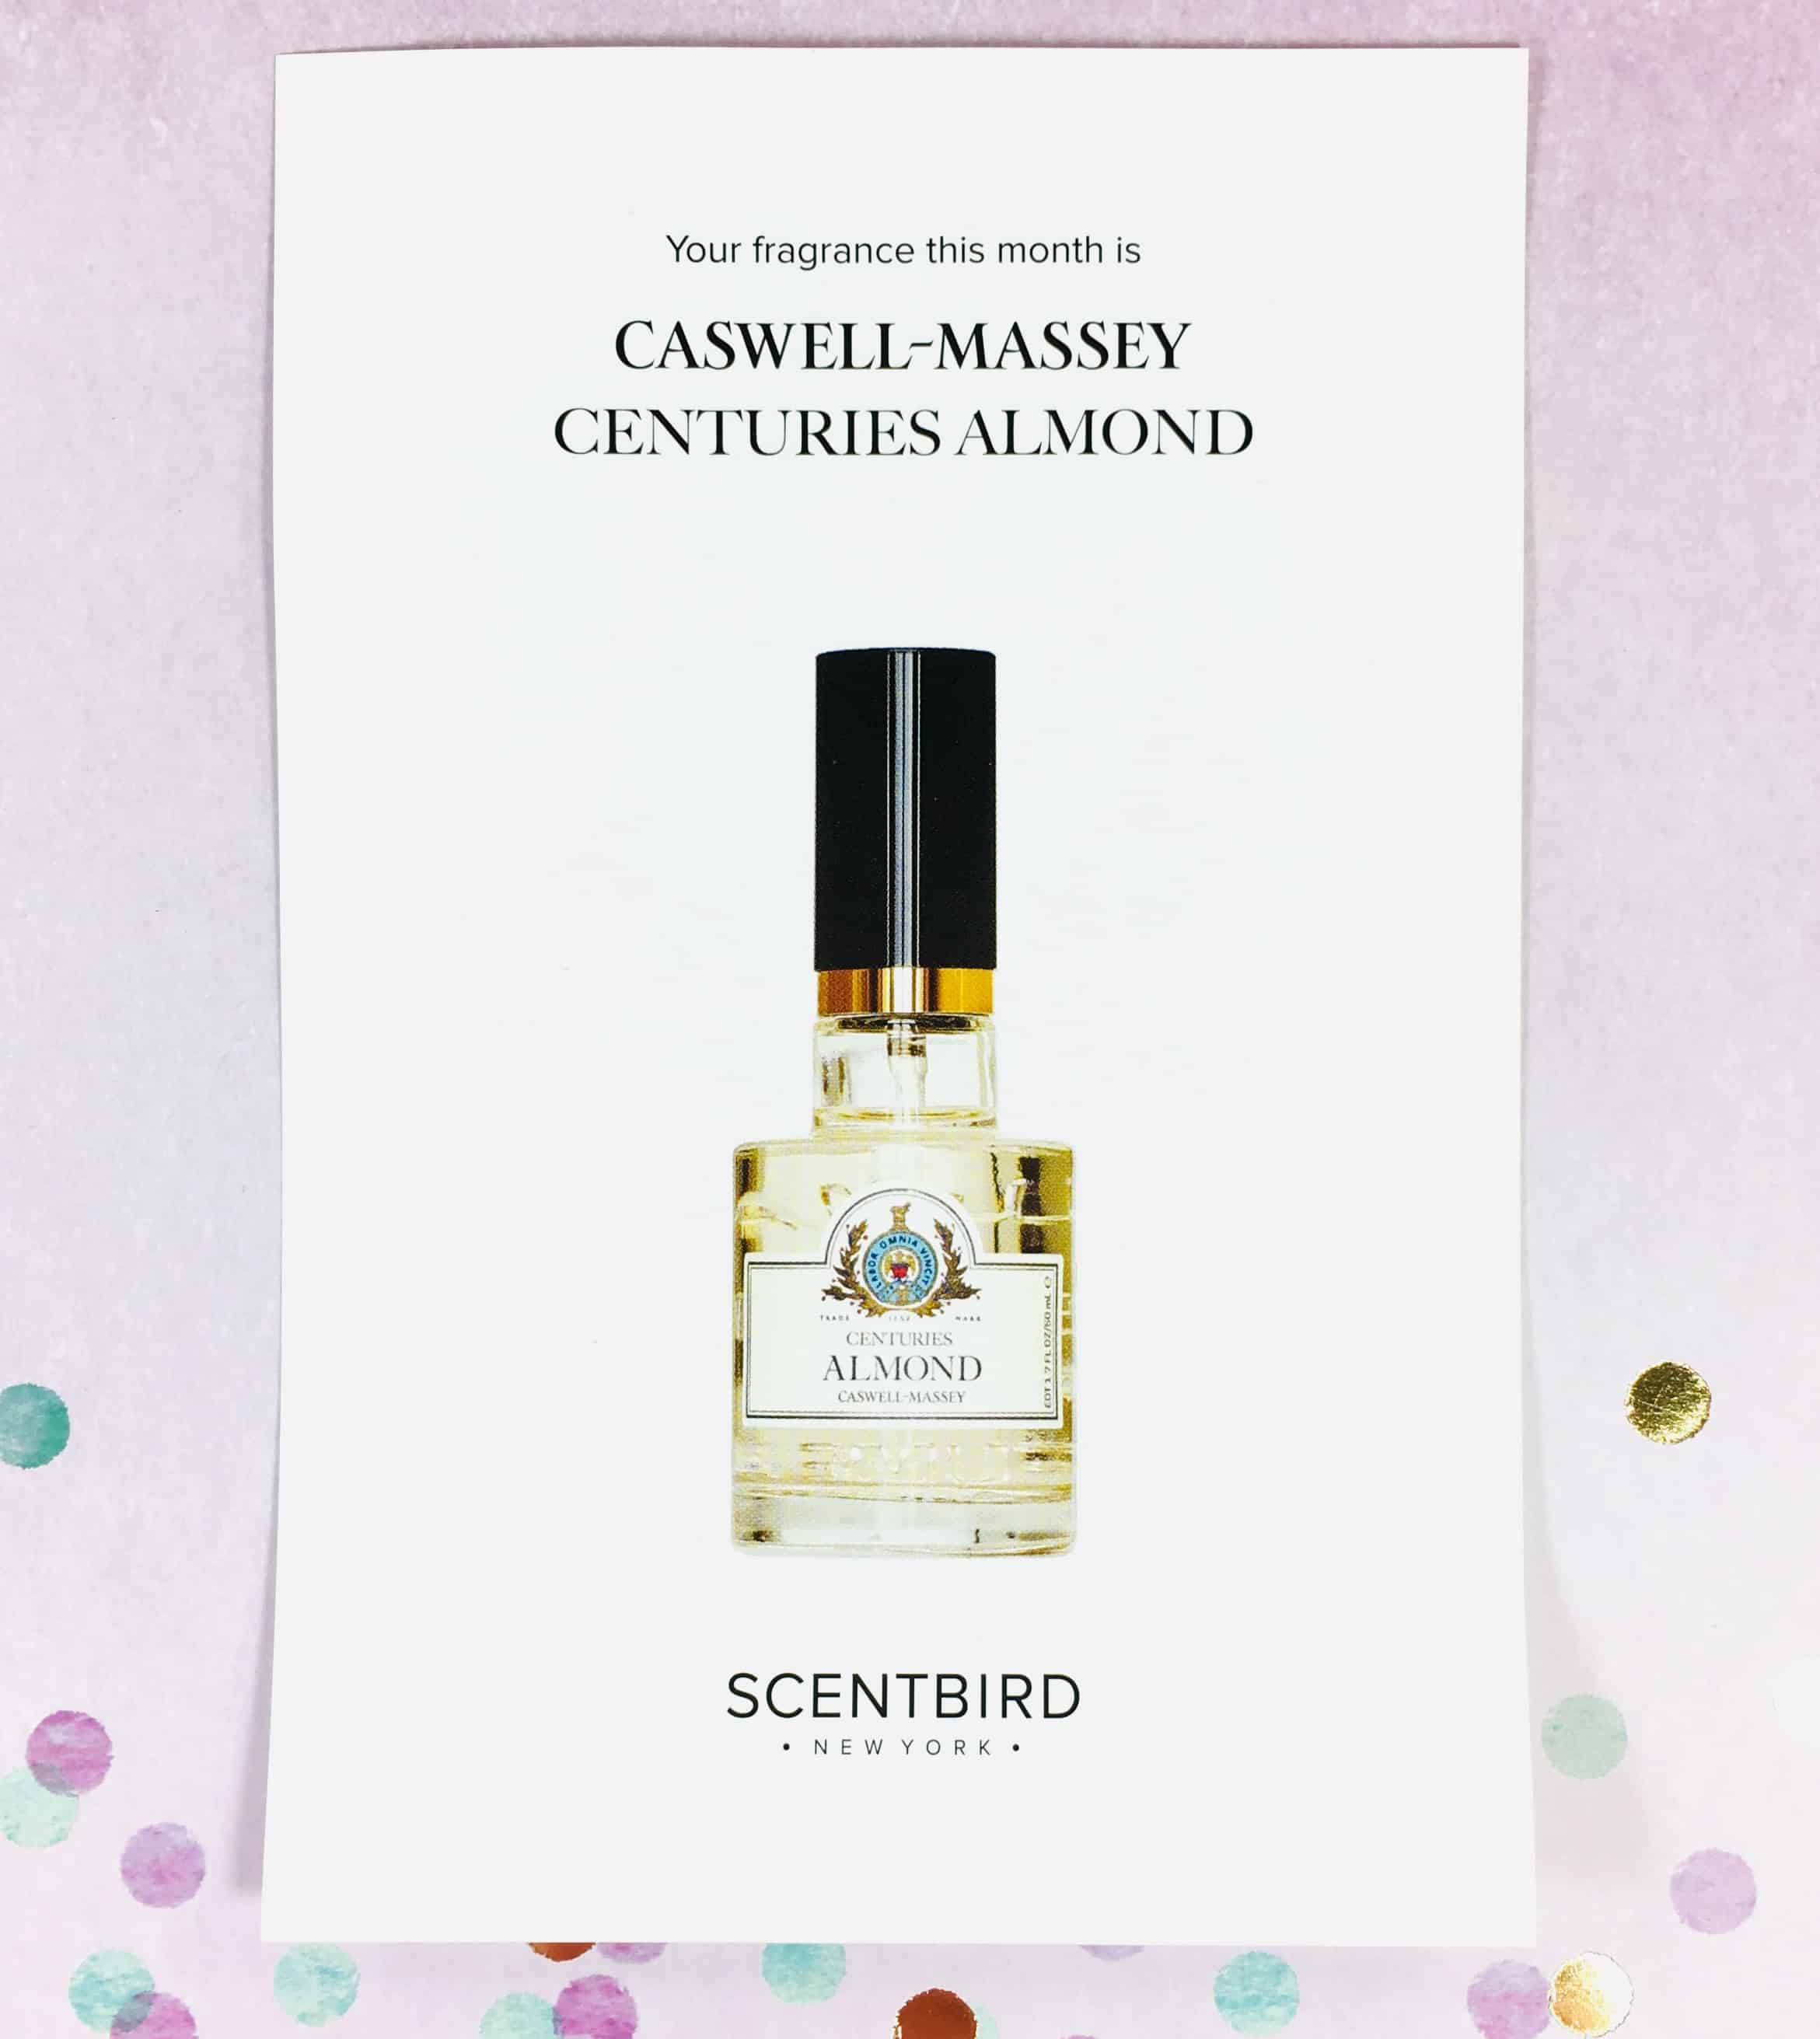 Buy VINCE CAMUTO Homme cologne at Scentbird for $16.95